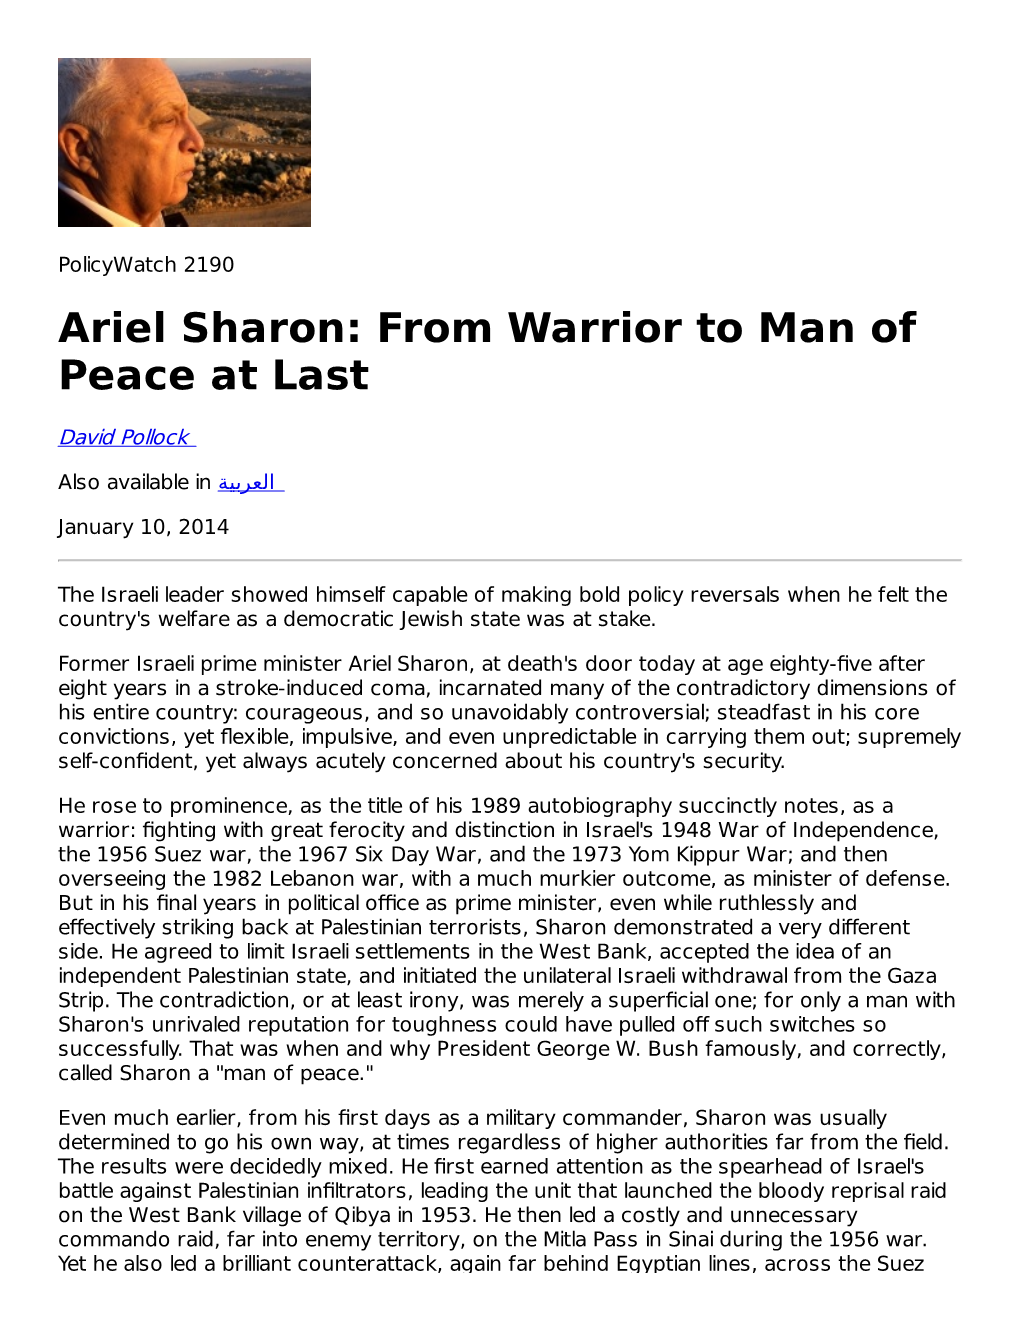 Ariel Sharon: from Warrior to Man of Peace at Last